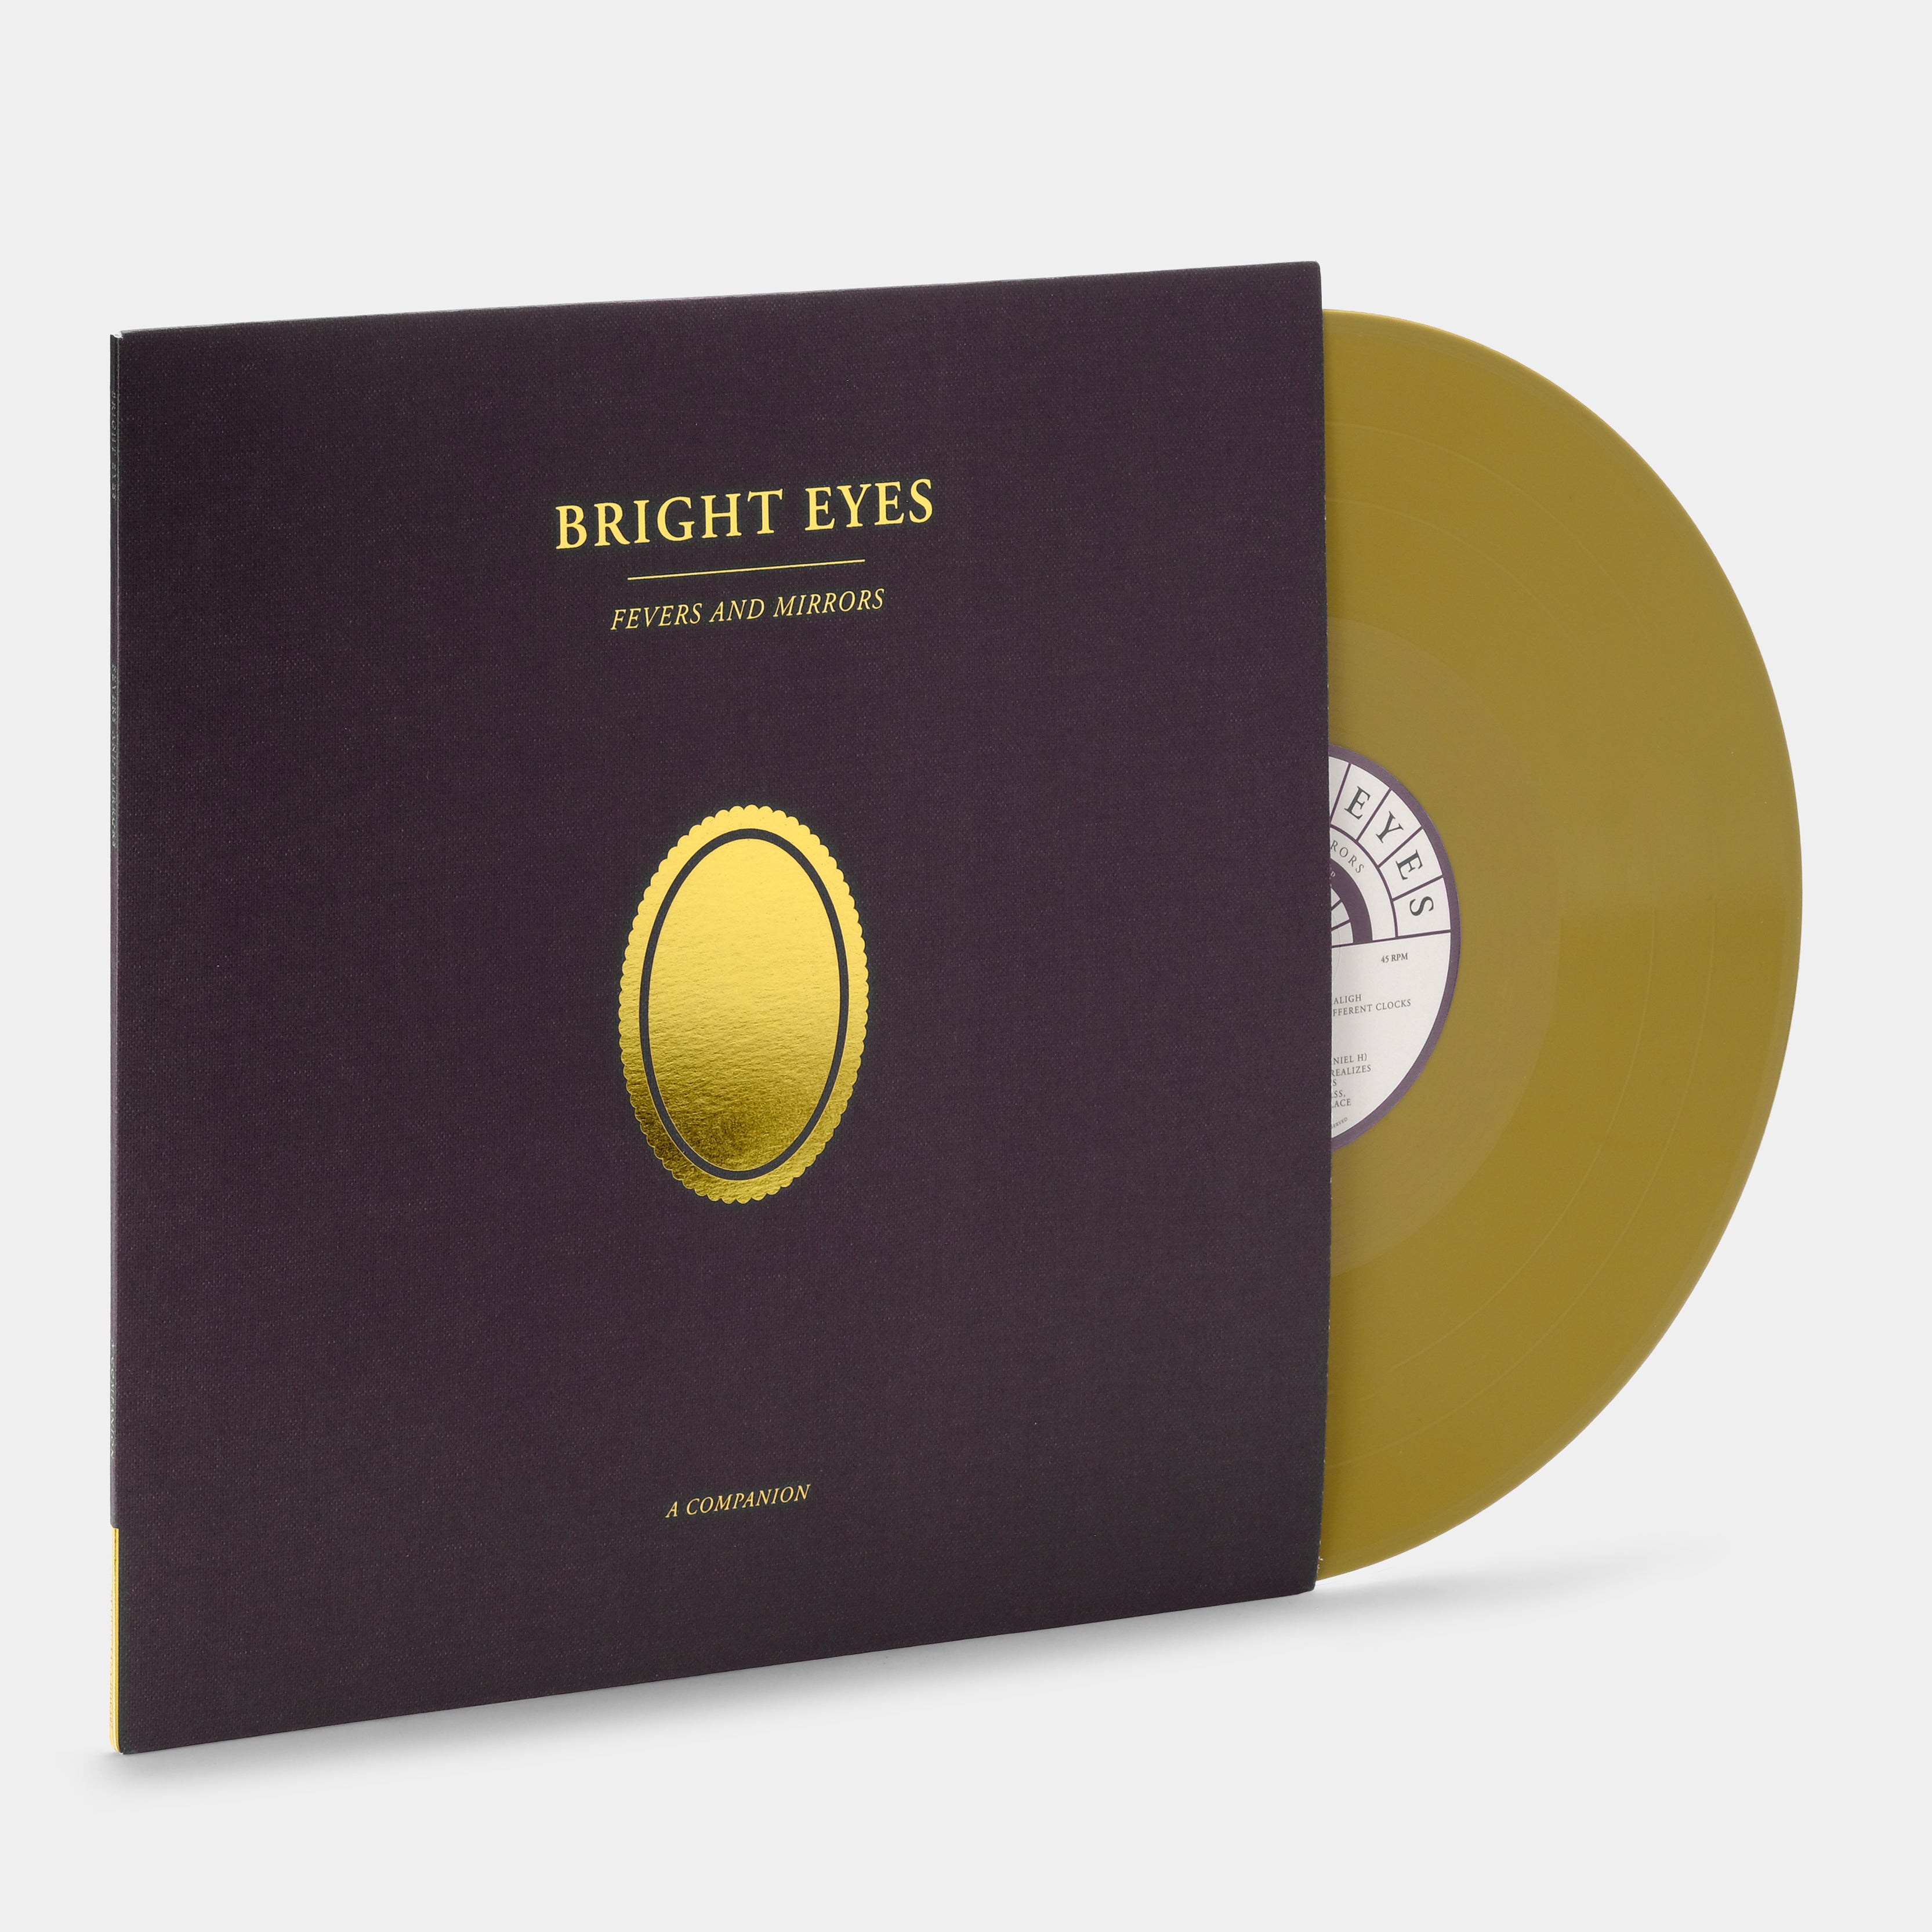 Bright Eyes - Fevers and Mirrors (A Companion) EP Opaque Gold Vinyl Record